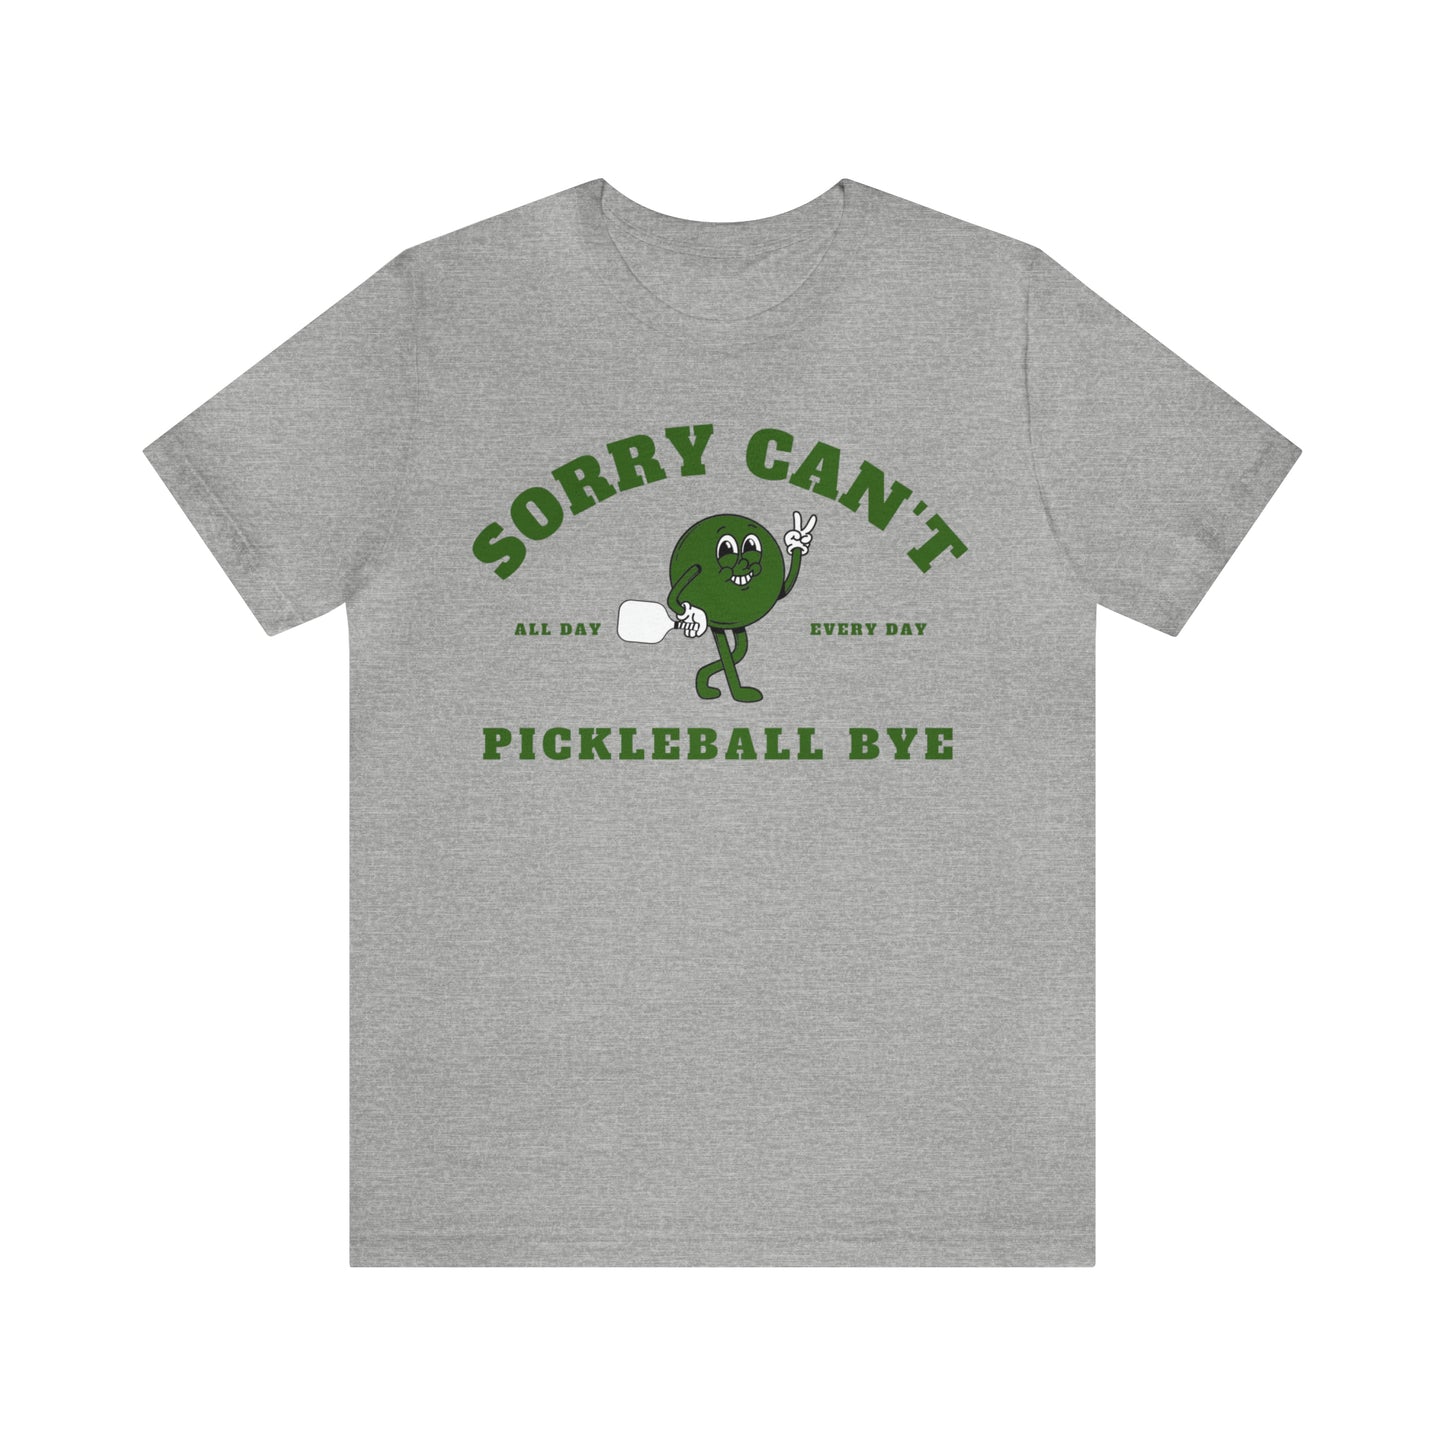 Sorry Can't Pickleball Bye - All Day Every Day